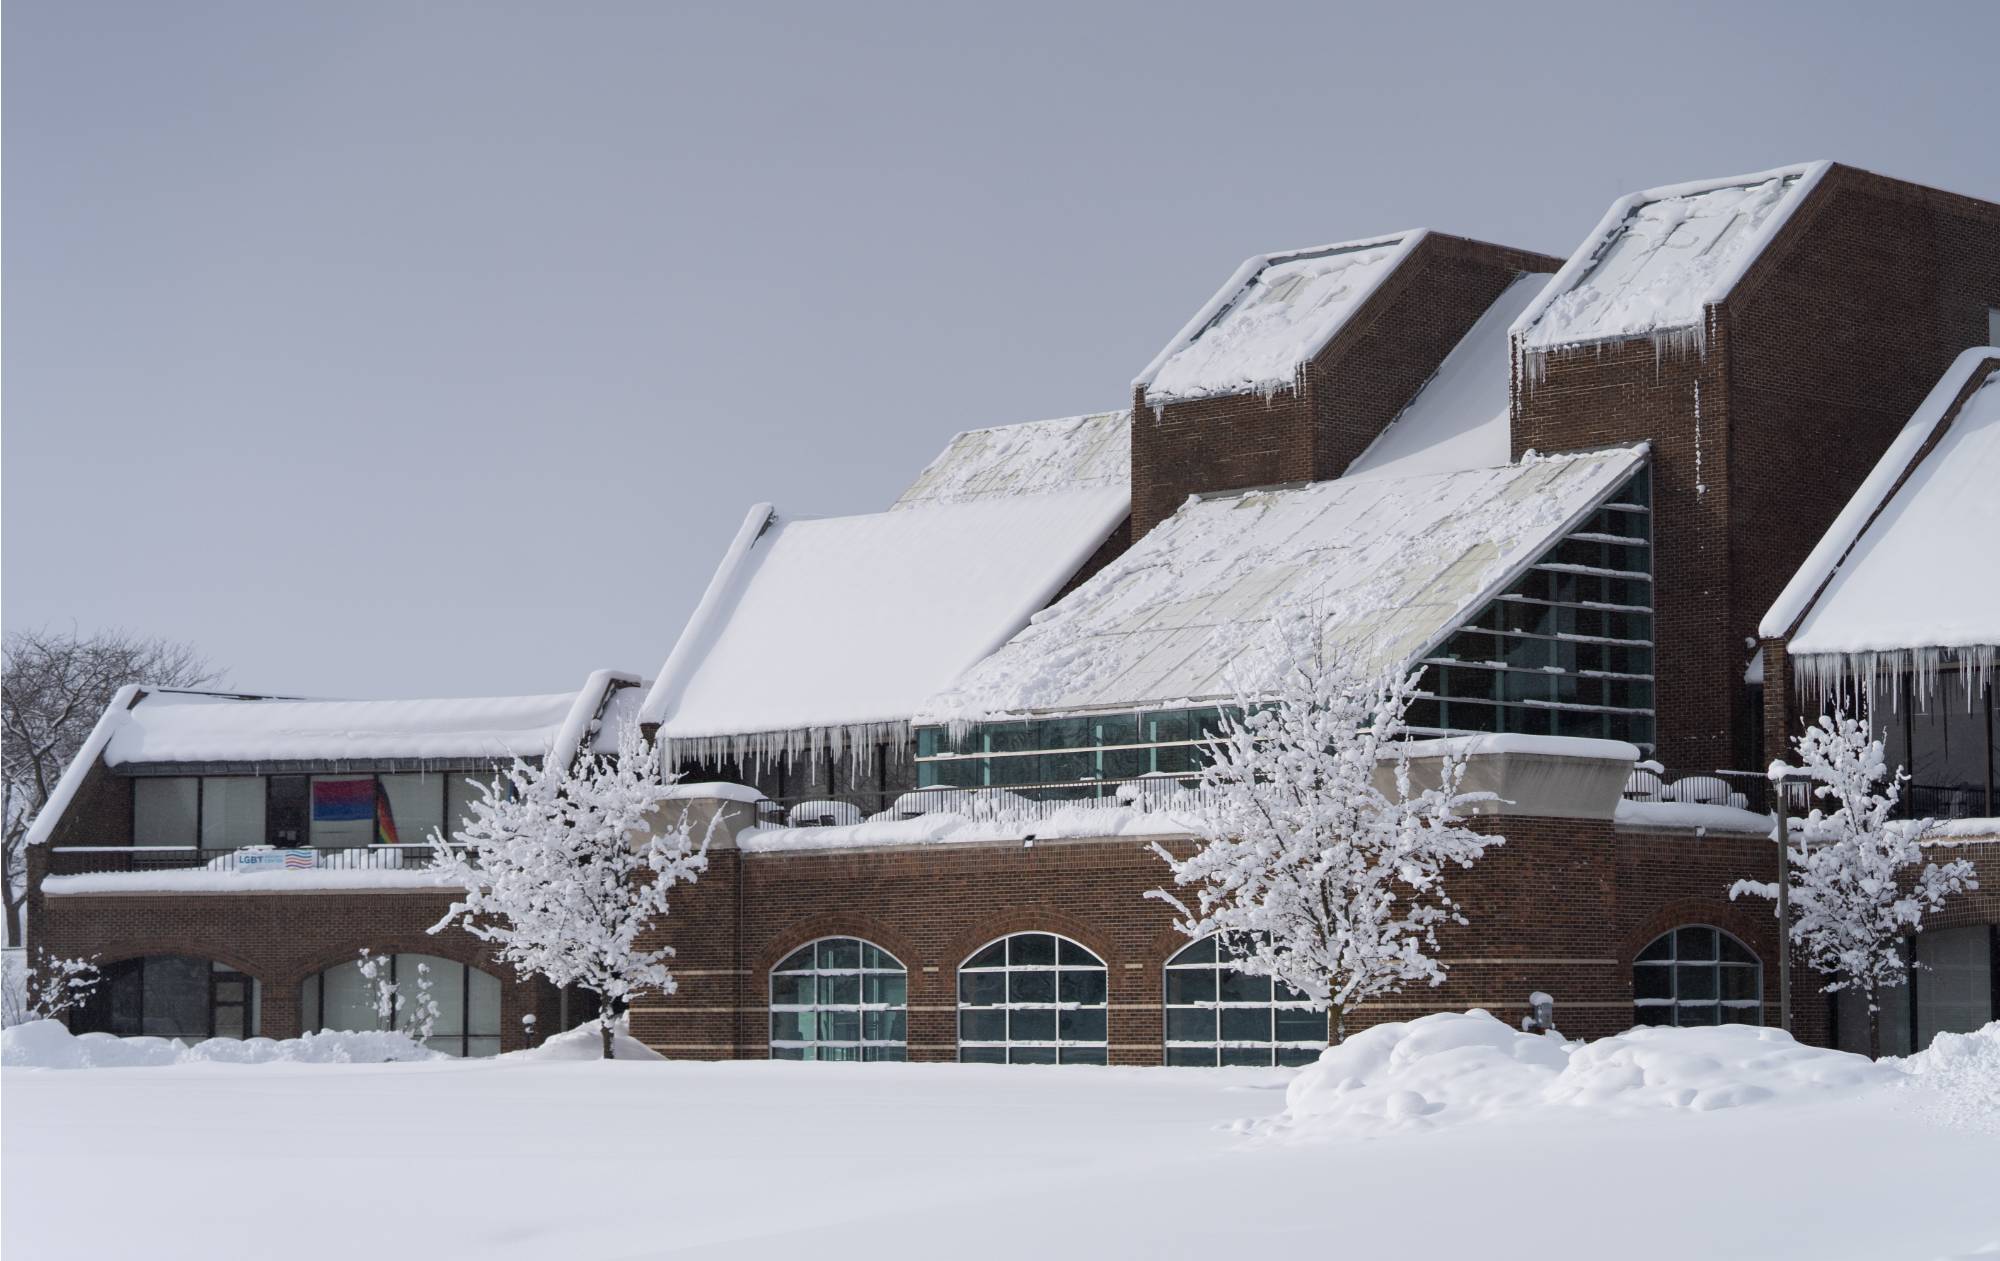 The Kirkhof Center on GVSU's Allendale Campus in the winter with snow on the ground